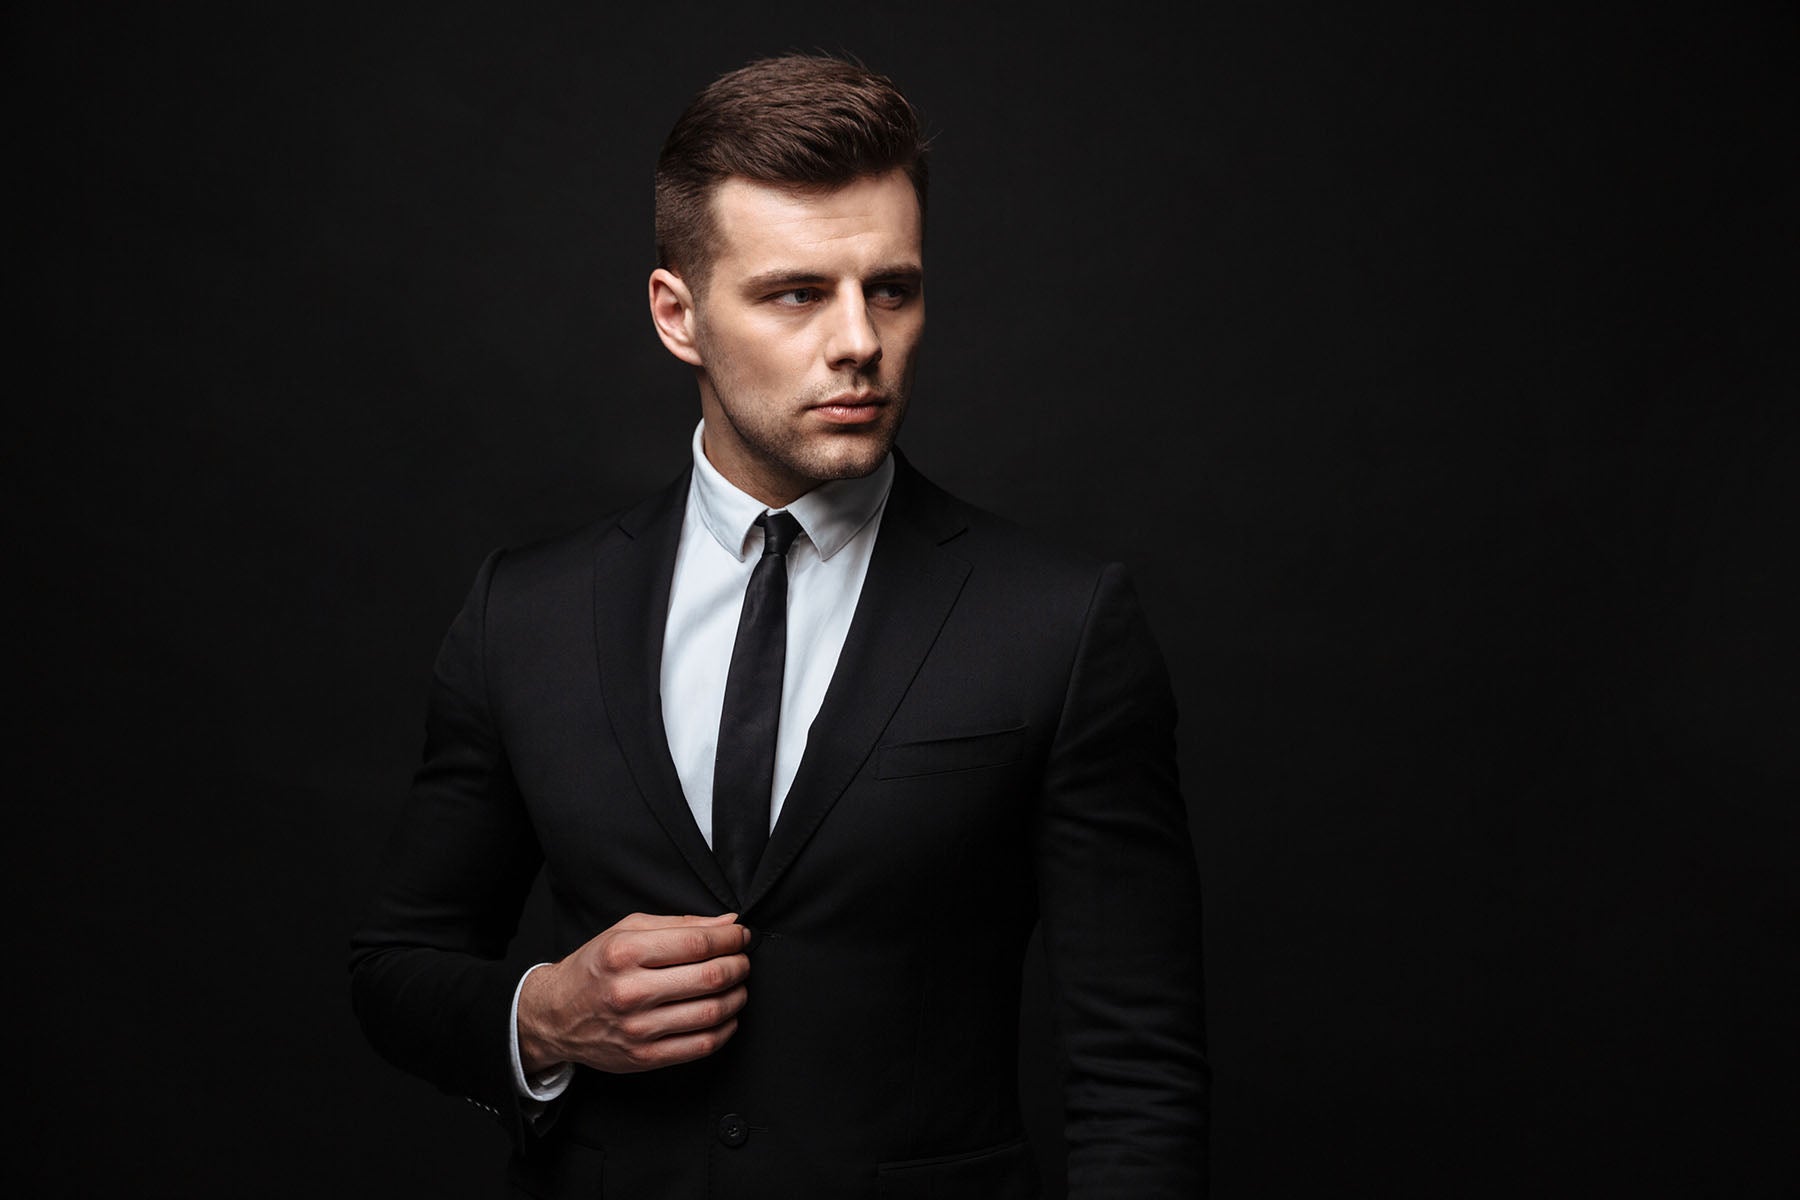 How to Look Good in A Black Suit